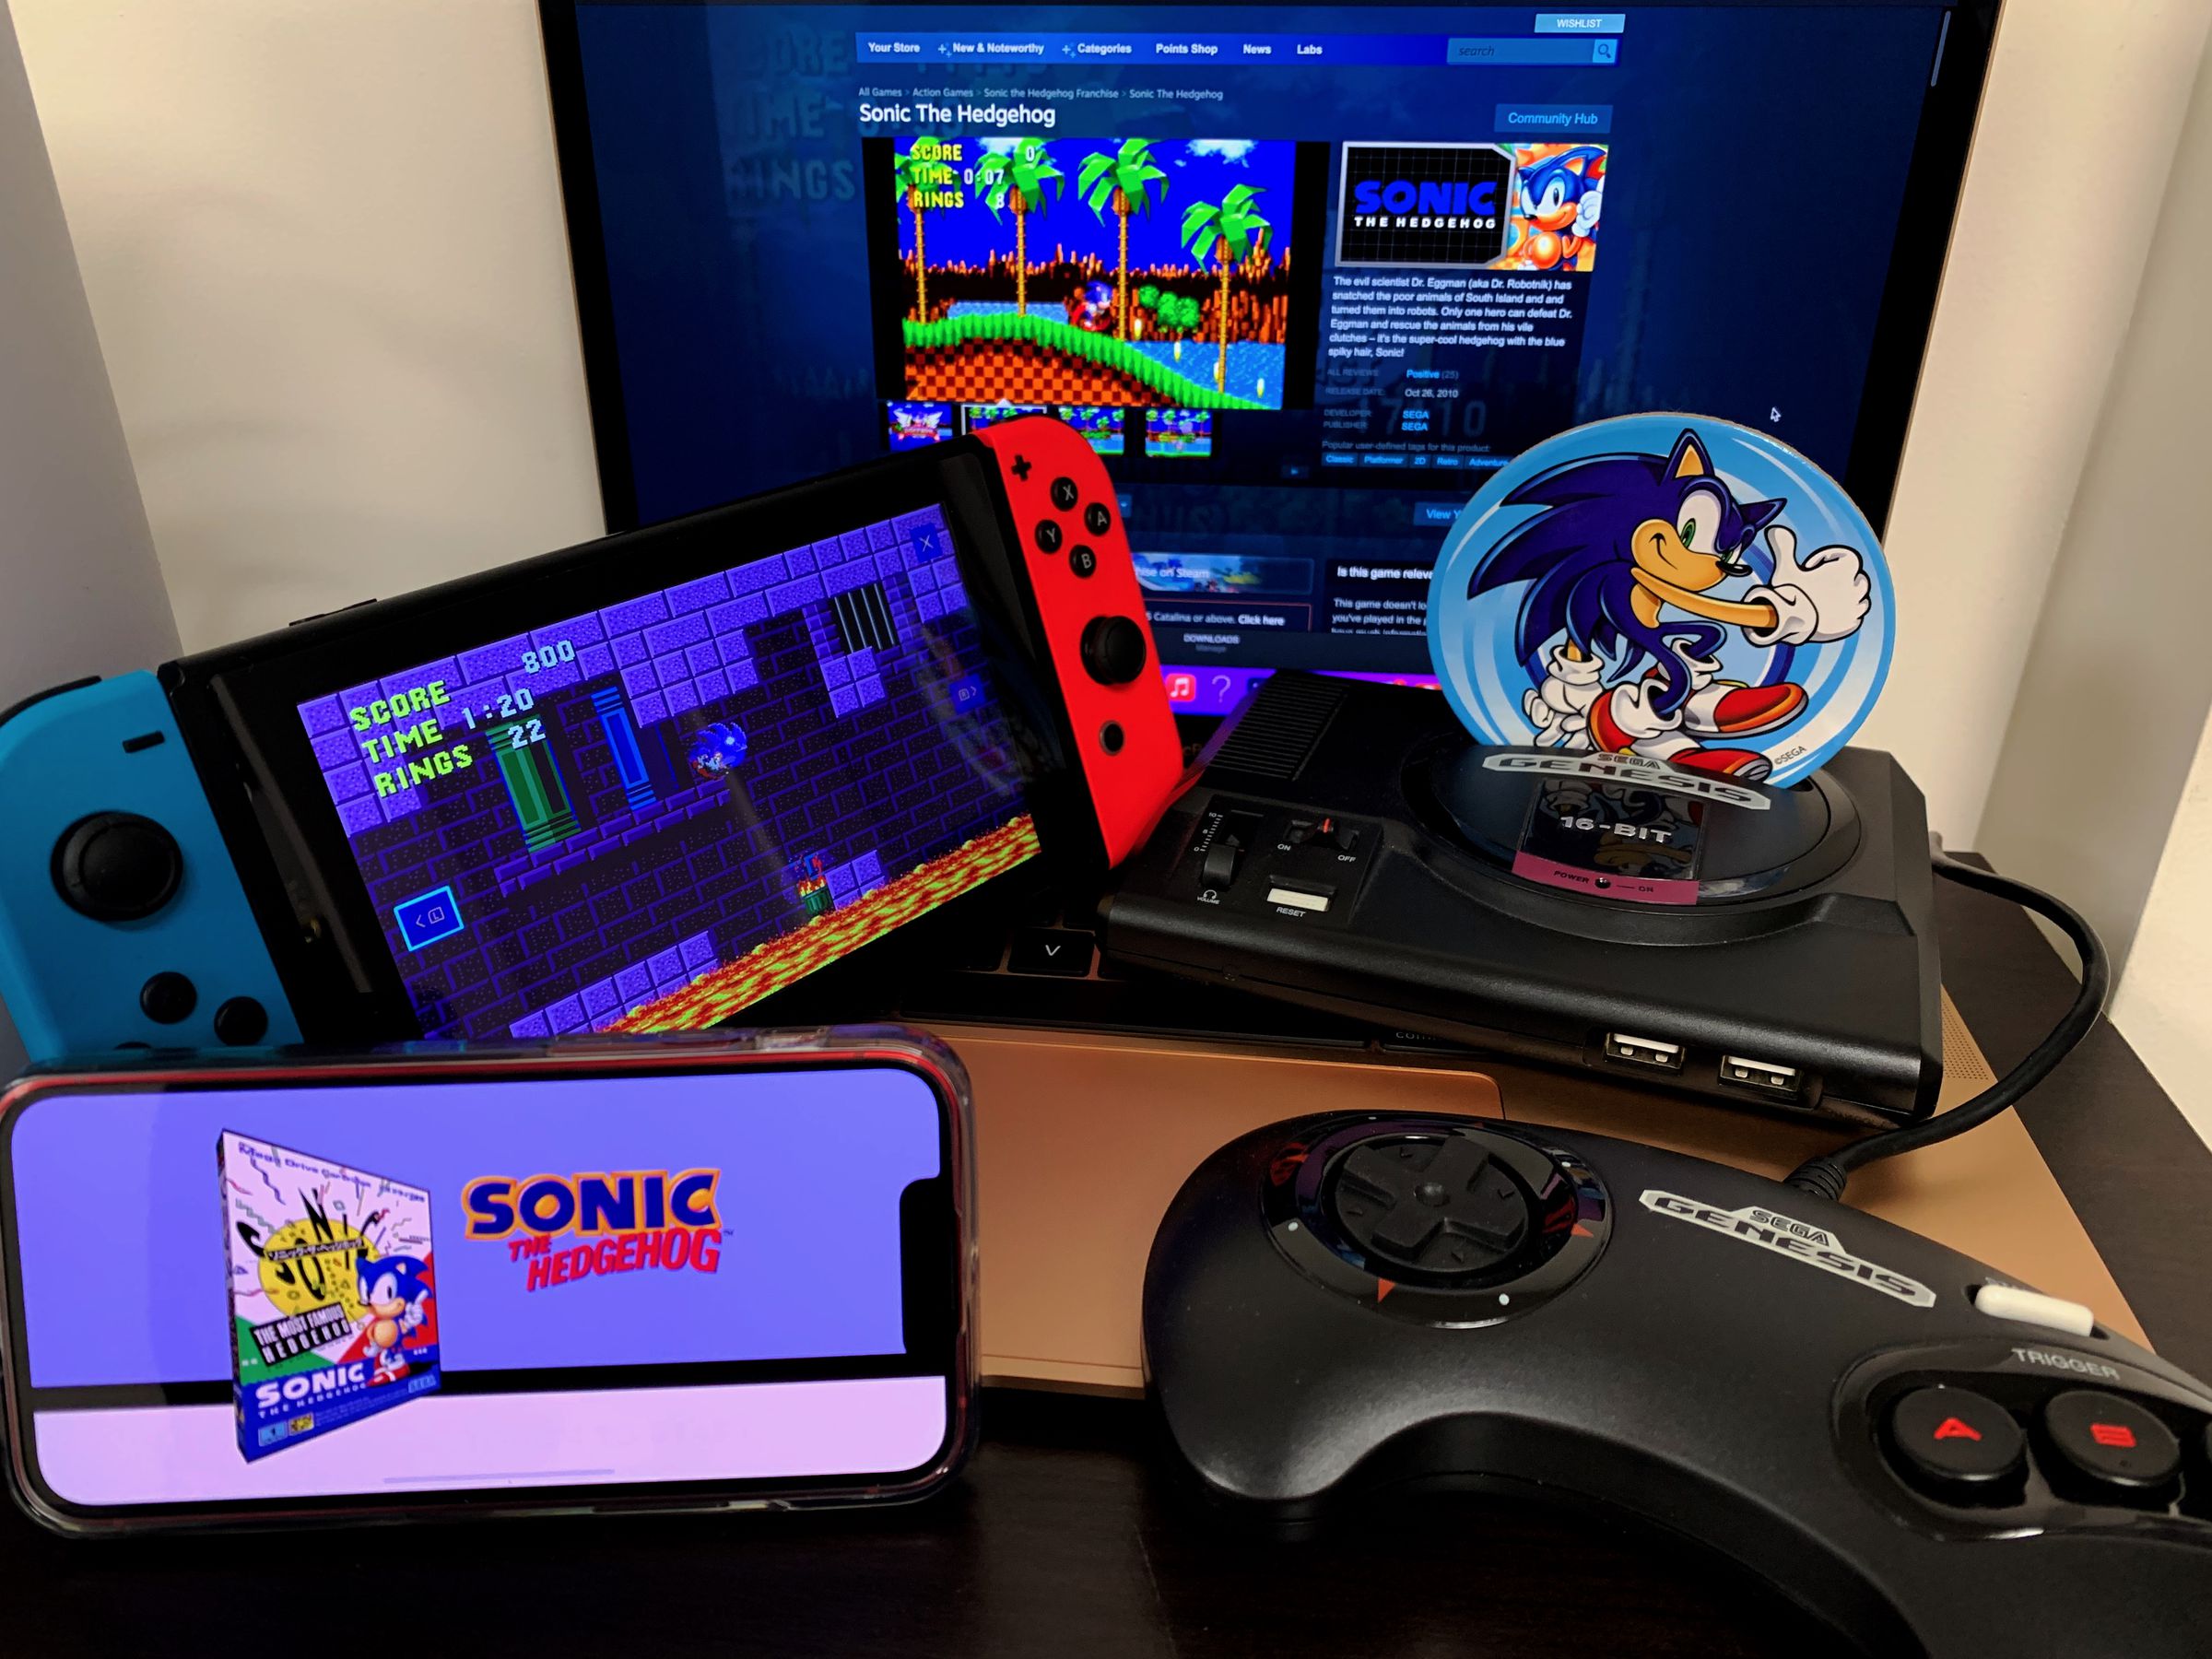 On a table, there are four devices: an iPhone 13 mini, Genesis mini, Nintendo Switch with blue and red joy cons, and a rose gold MacBook Air. devices with screens are showing sonic the hedgehog 1 game. A sonic character image on a coaster is propped up in the genesis console slot.